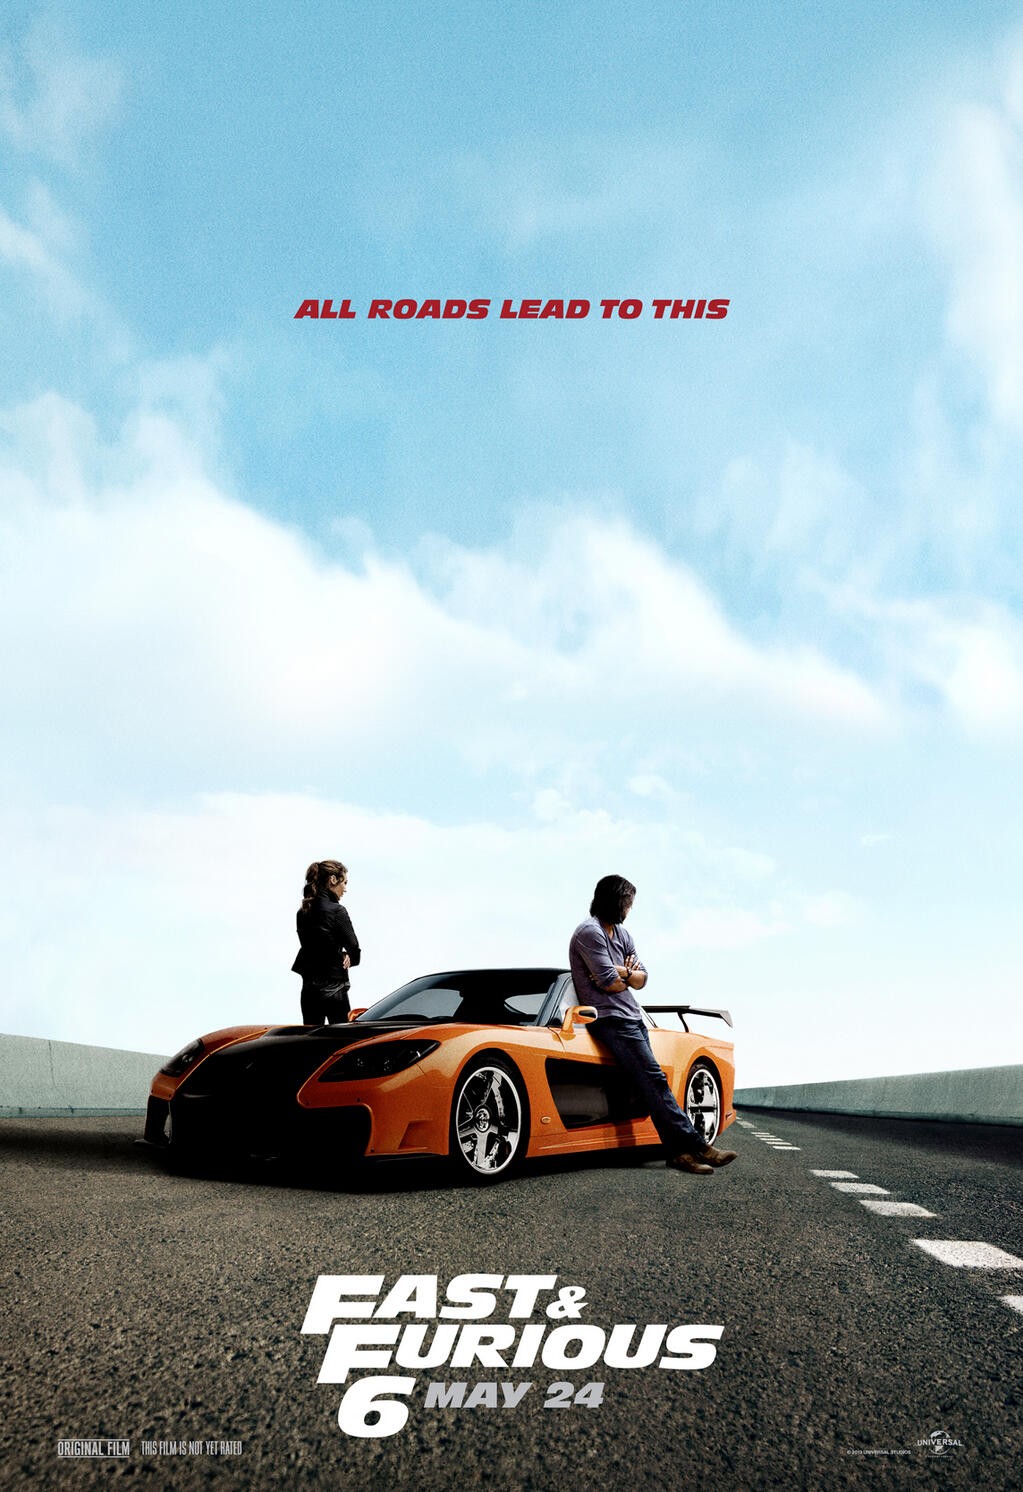 FAST & FURIOUS 6 Poster 01